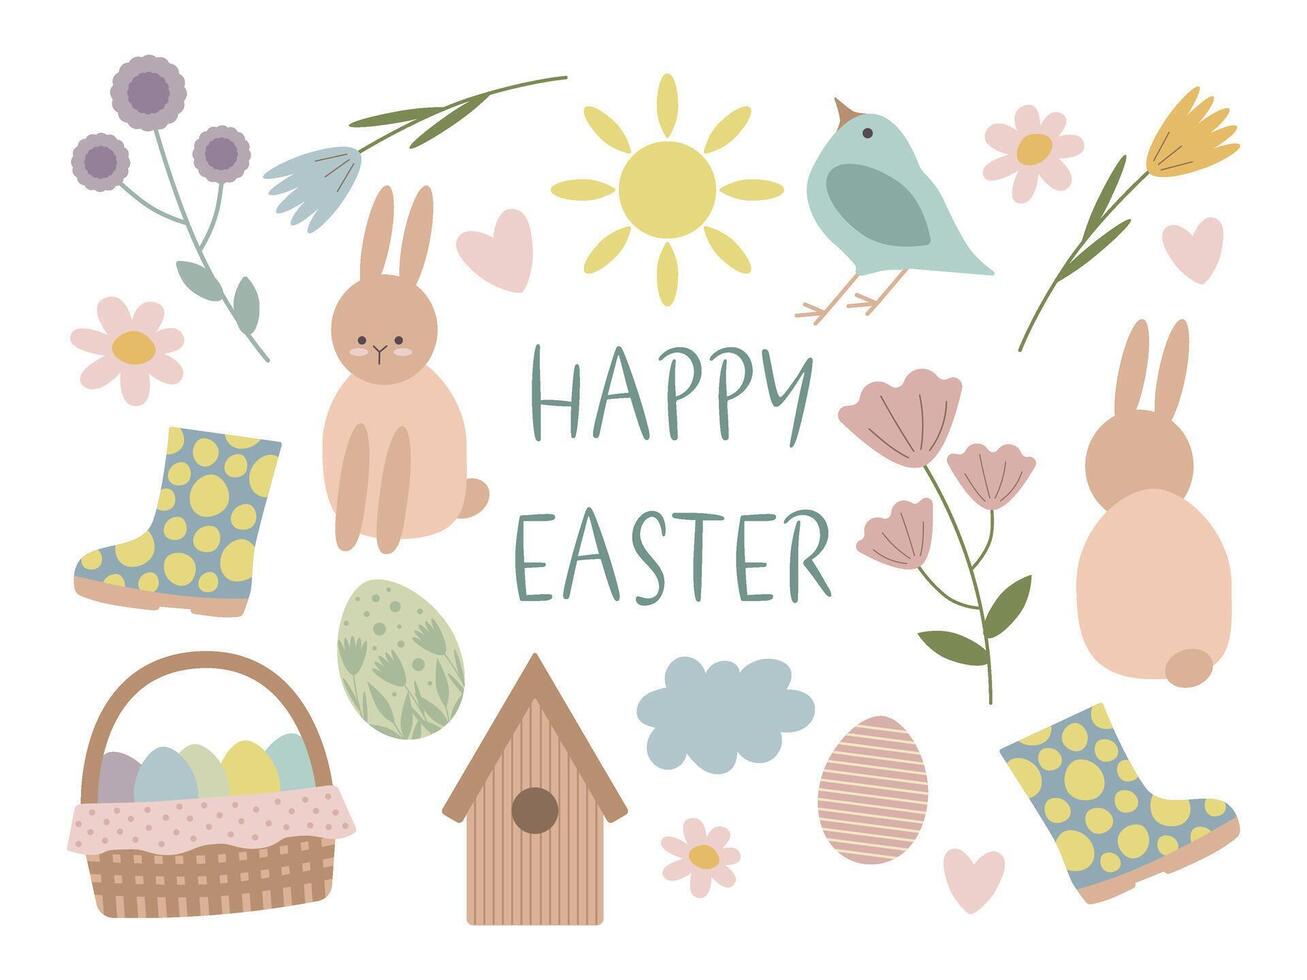 Cute Easter set. Easter bunny, eggs, sun, flowers, rubber boots, basket, bird, birdhouse. Pastel colors. Spring elements for your design. vector